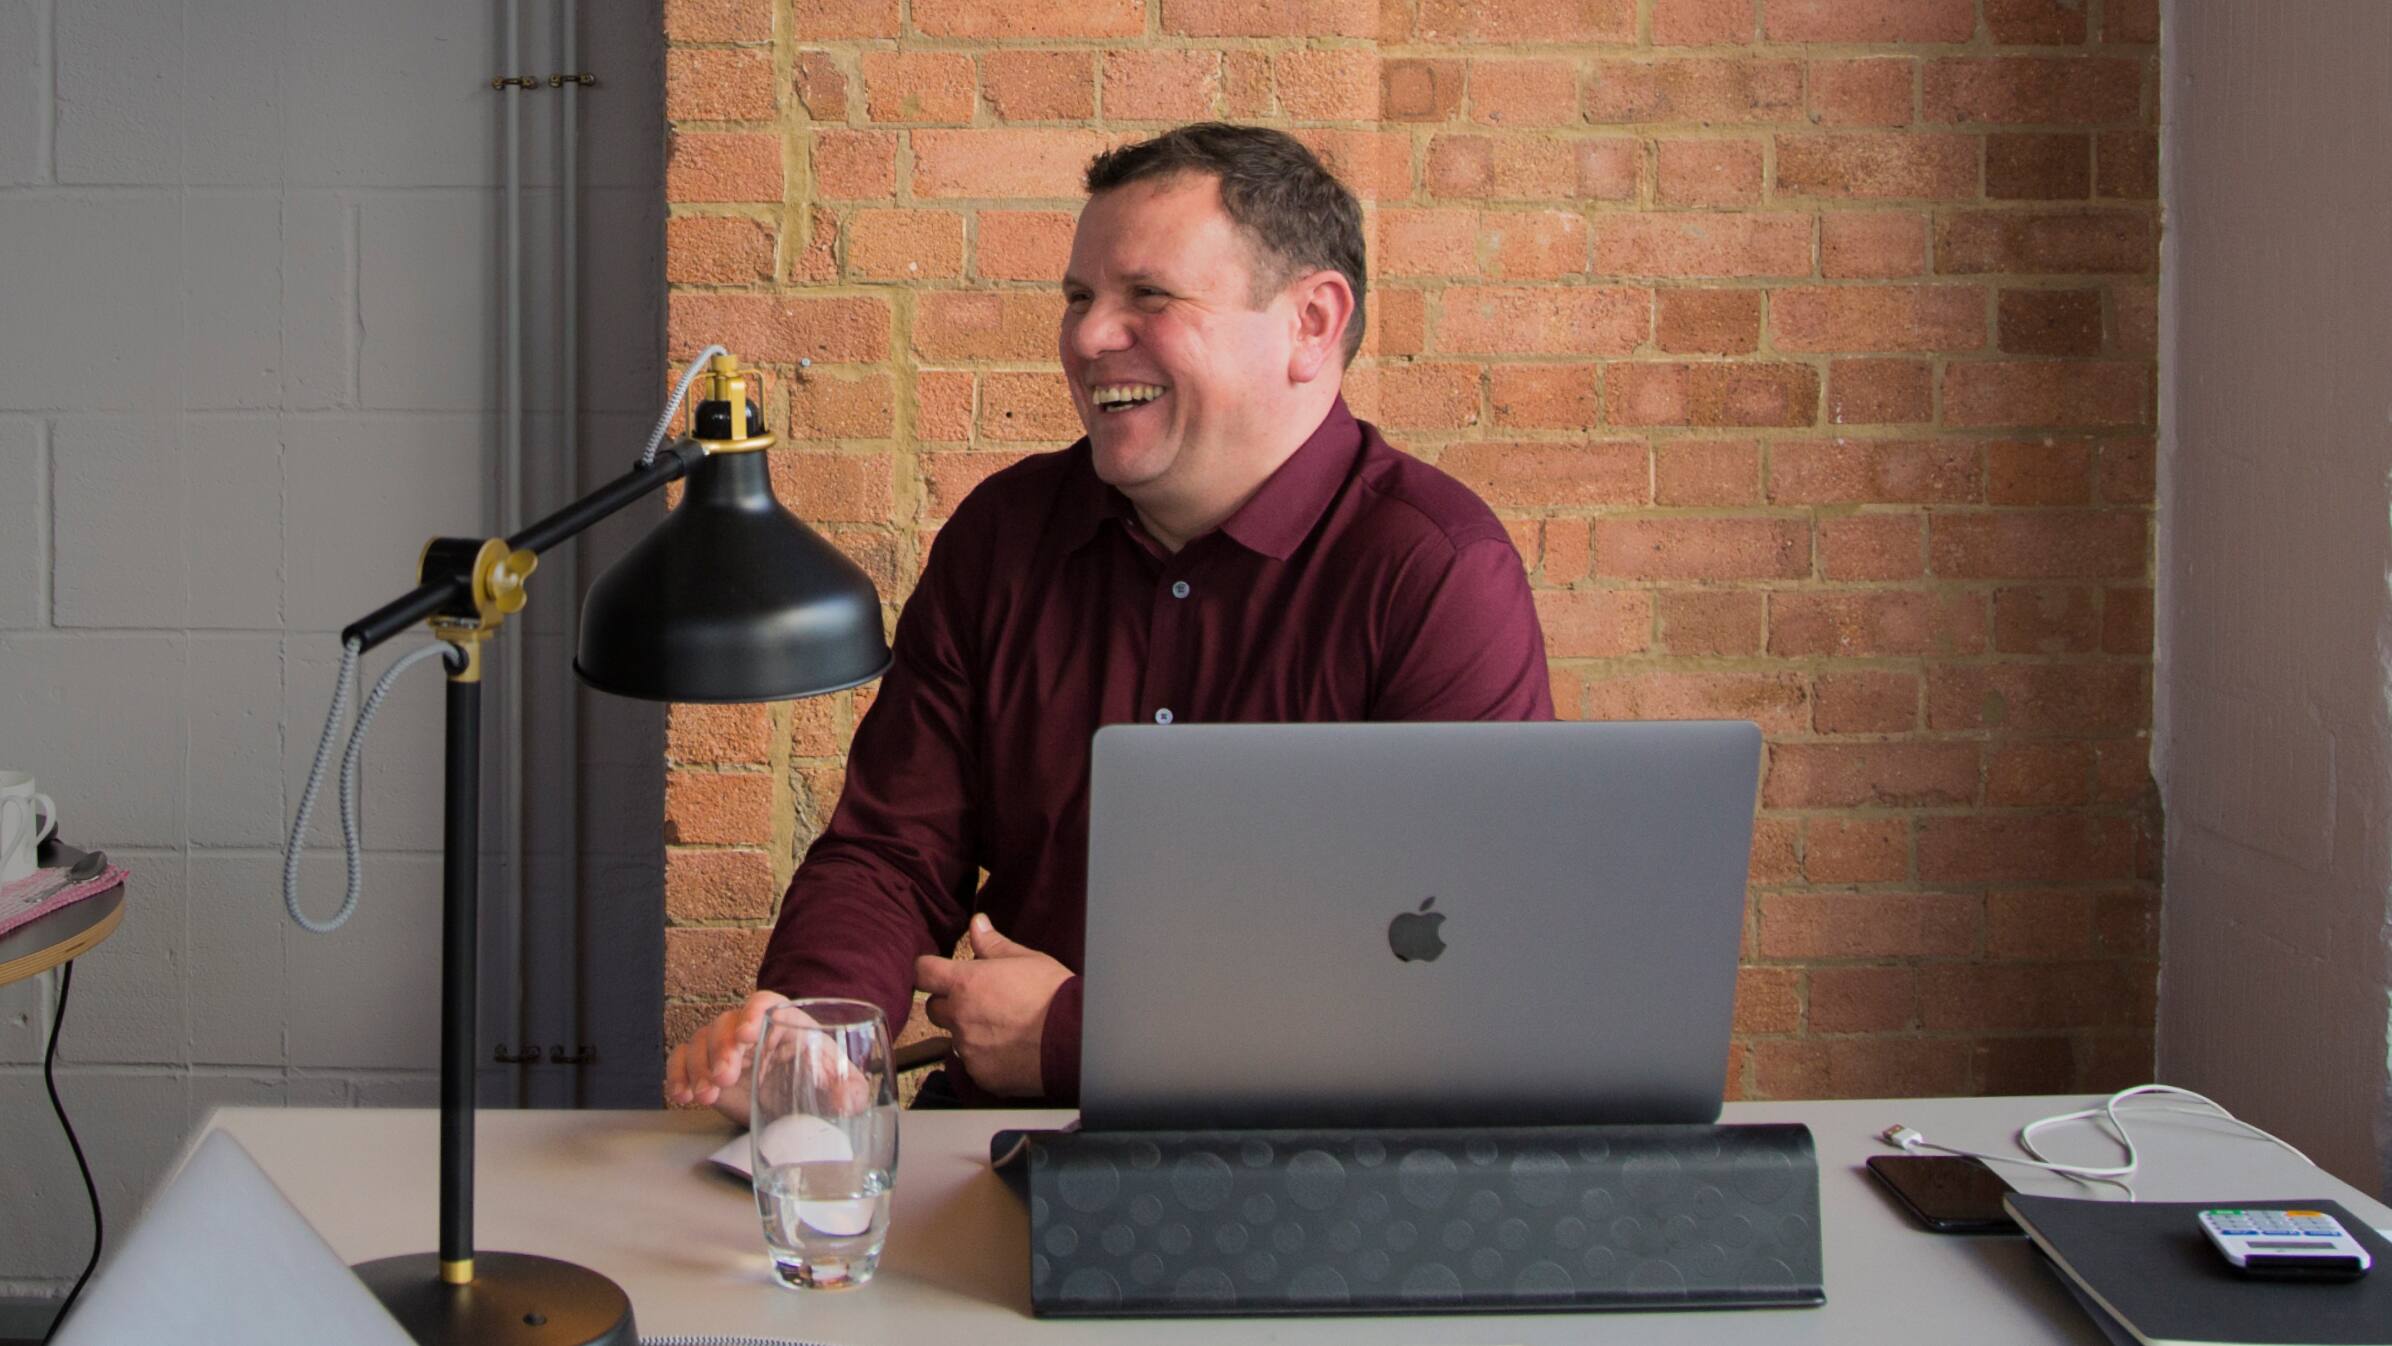 Steven Anderson, founder of creative agency Future Kings, laughing as they sit behind a laptop at their desk.